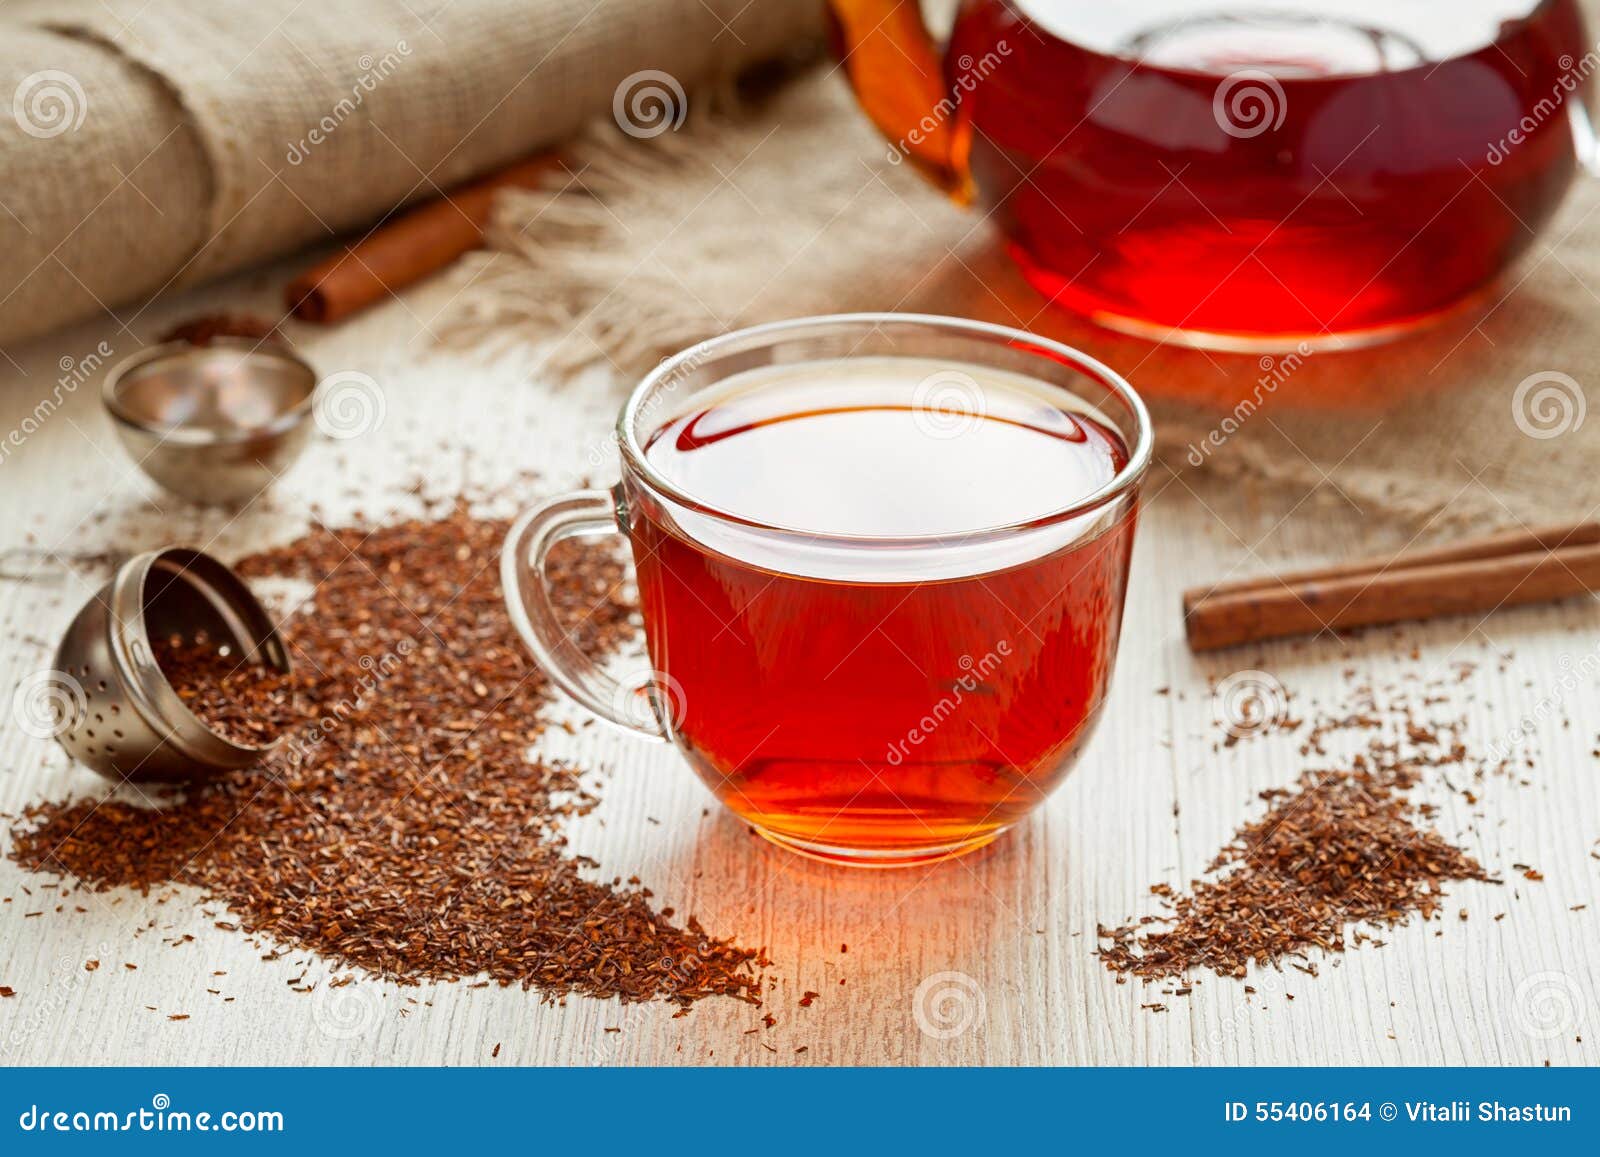 rooibus tea traditional south africa antioxidant